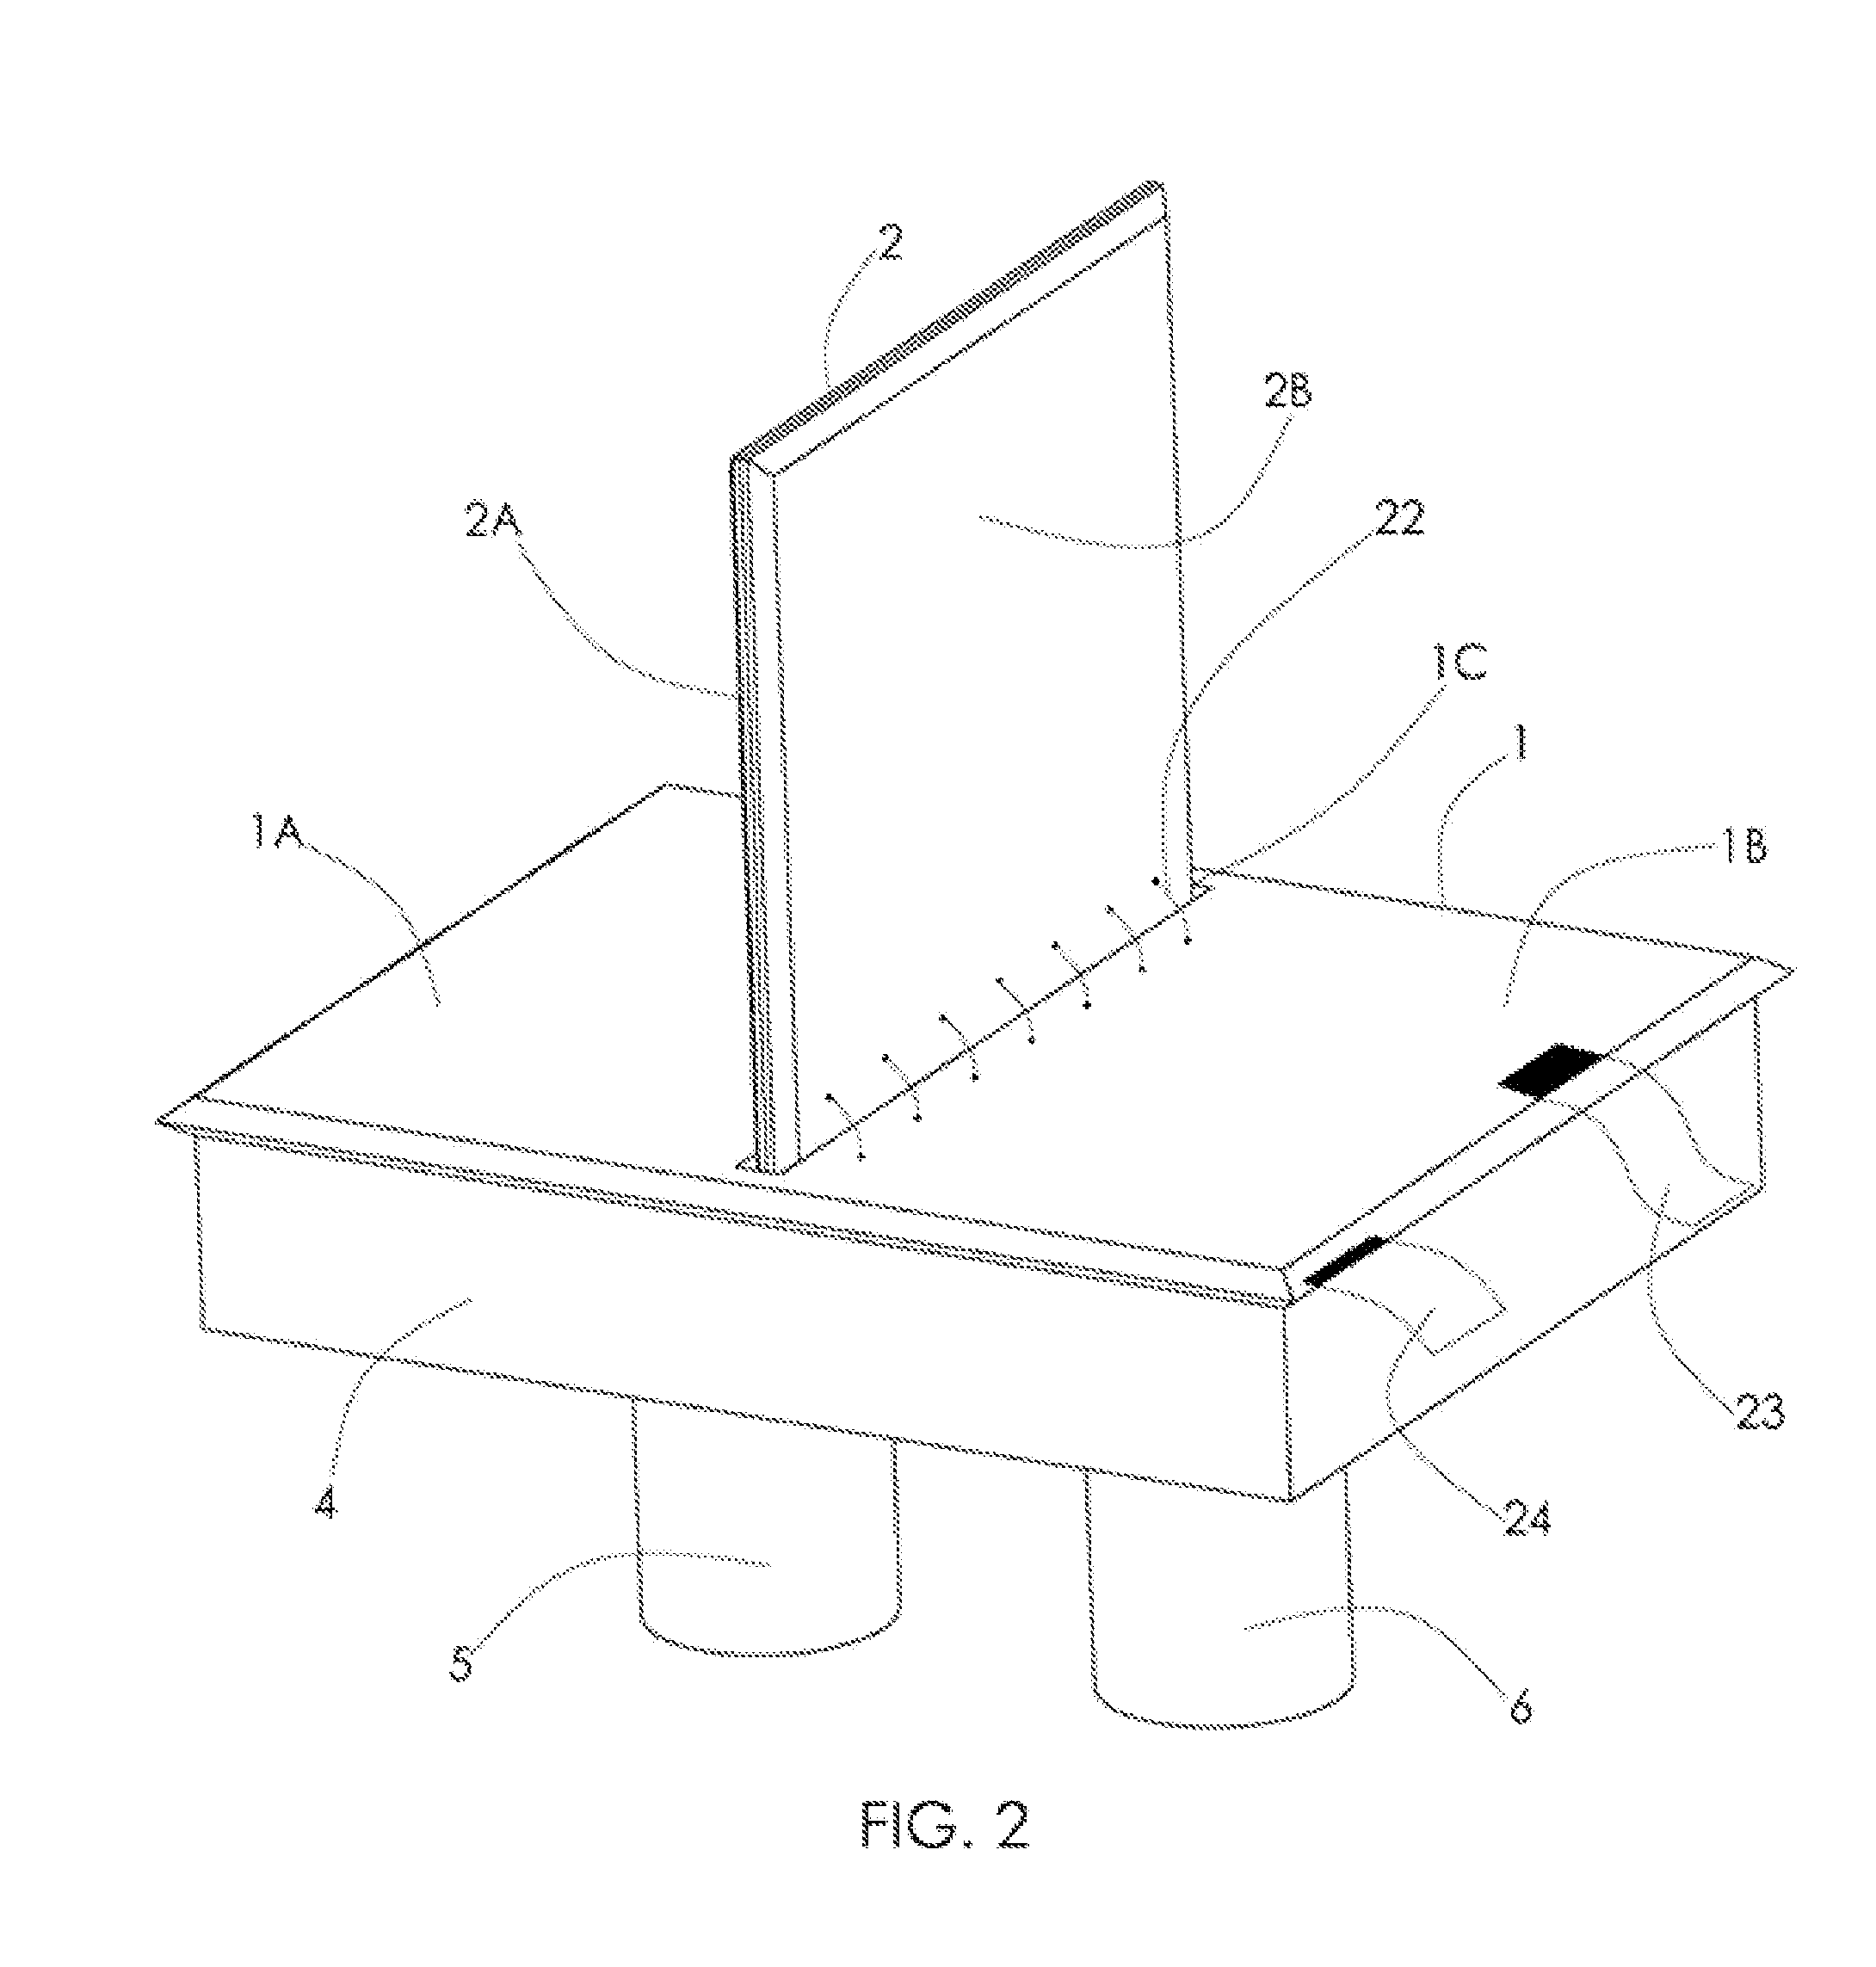 3-D sola cell device for a concentrated photovoltaic system